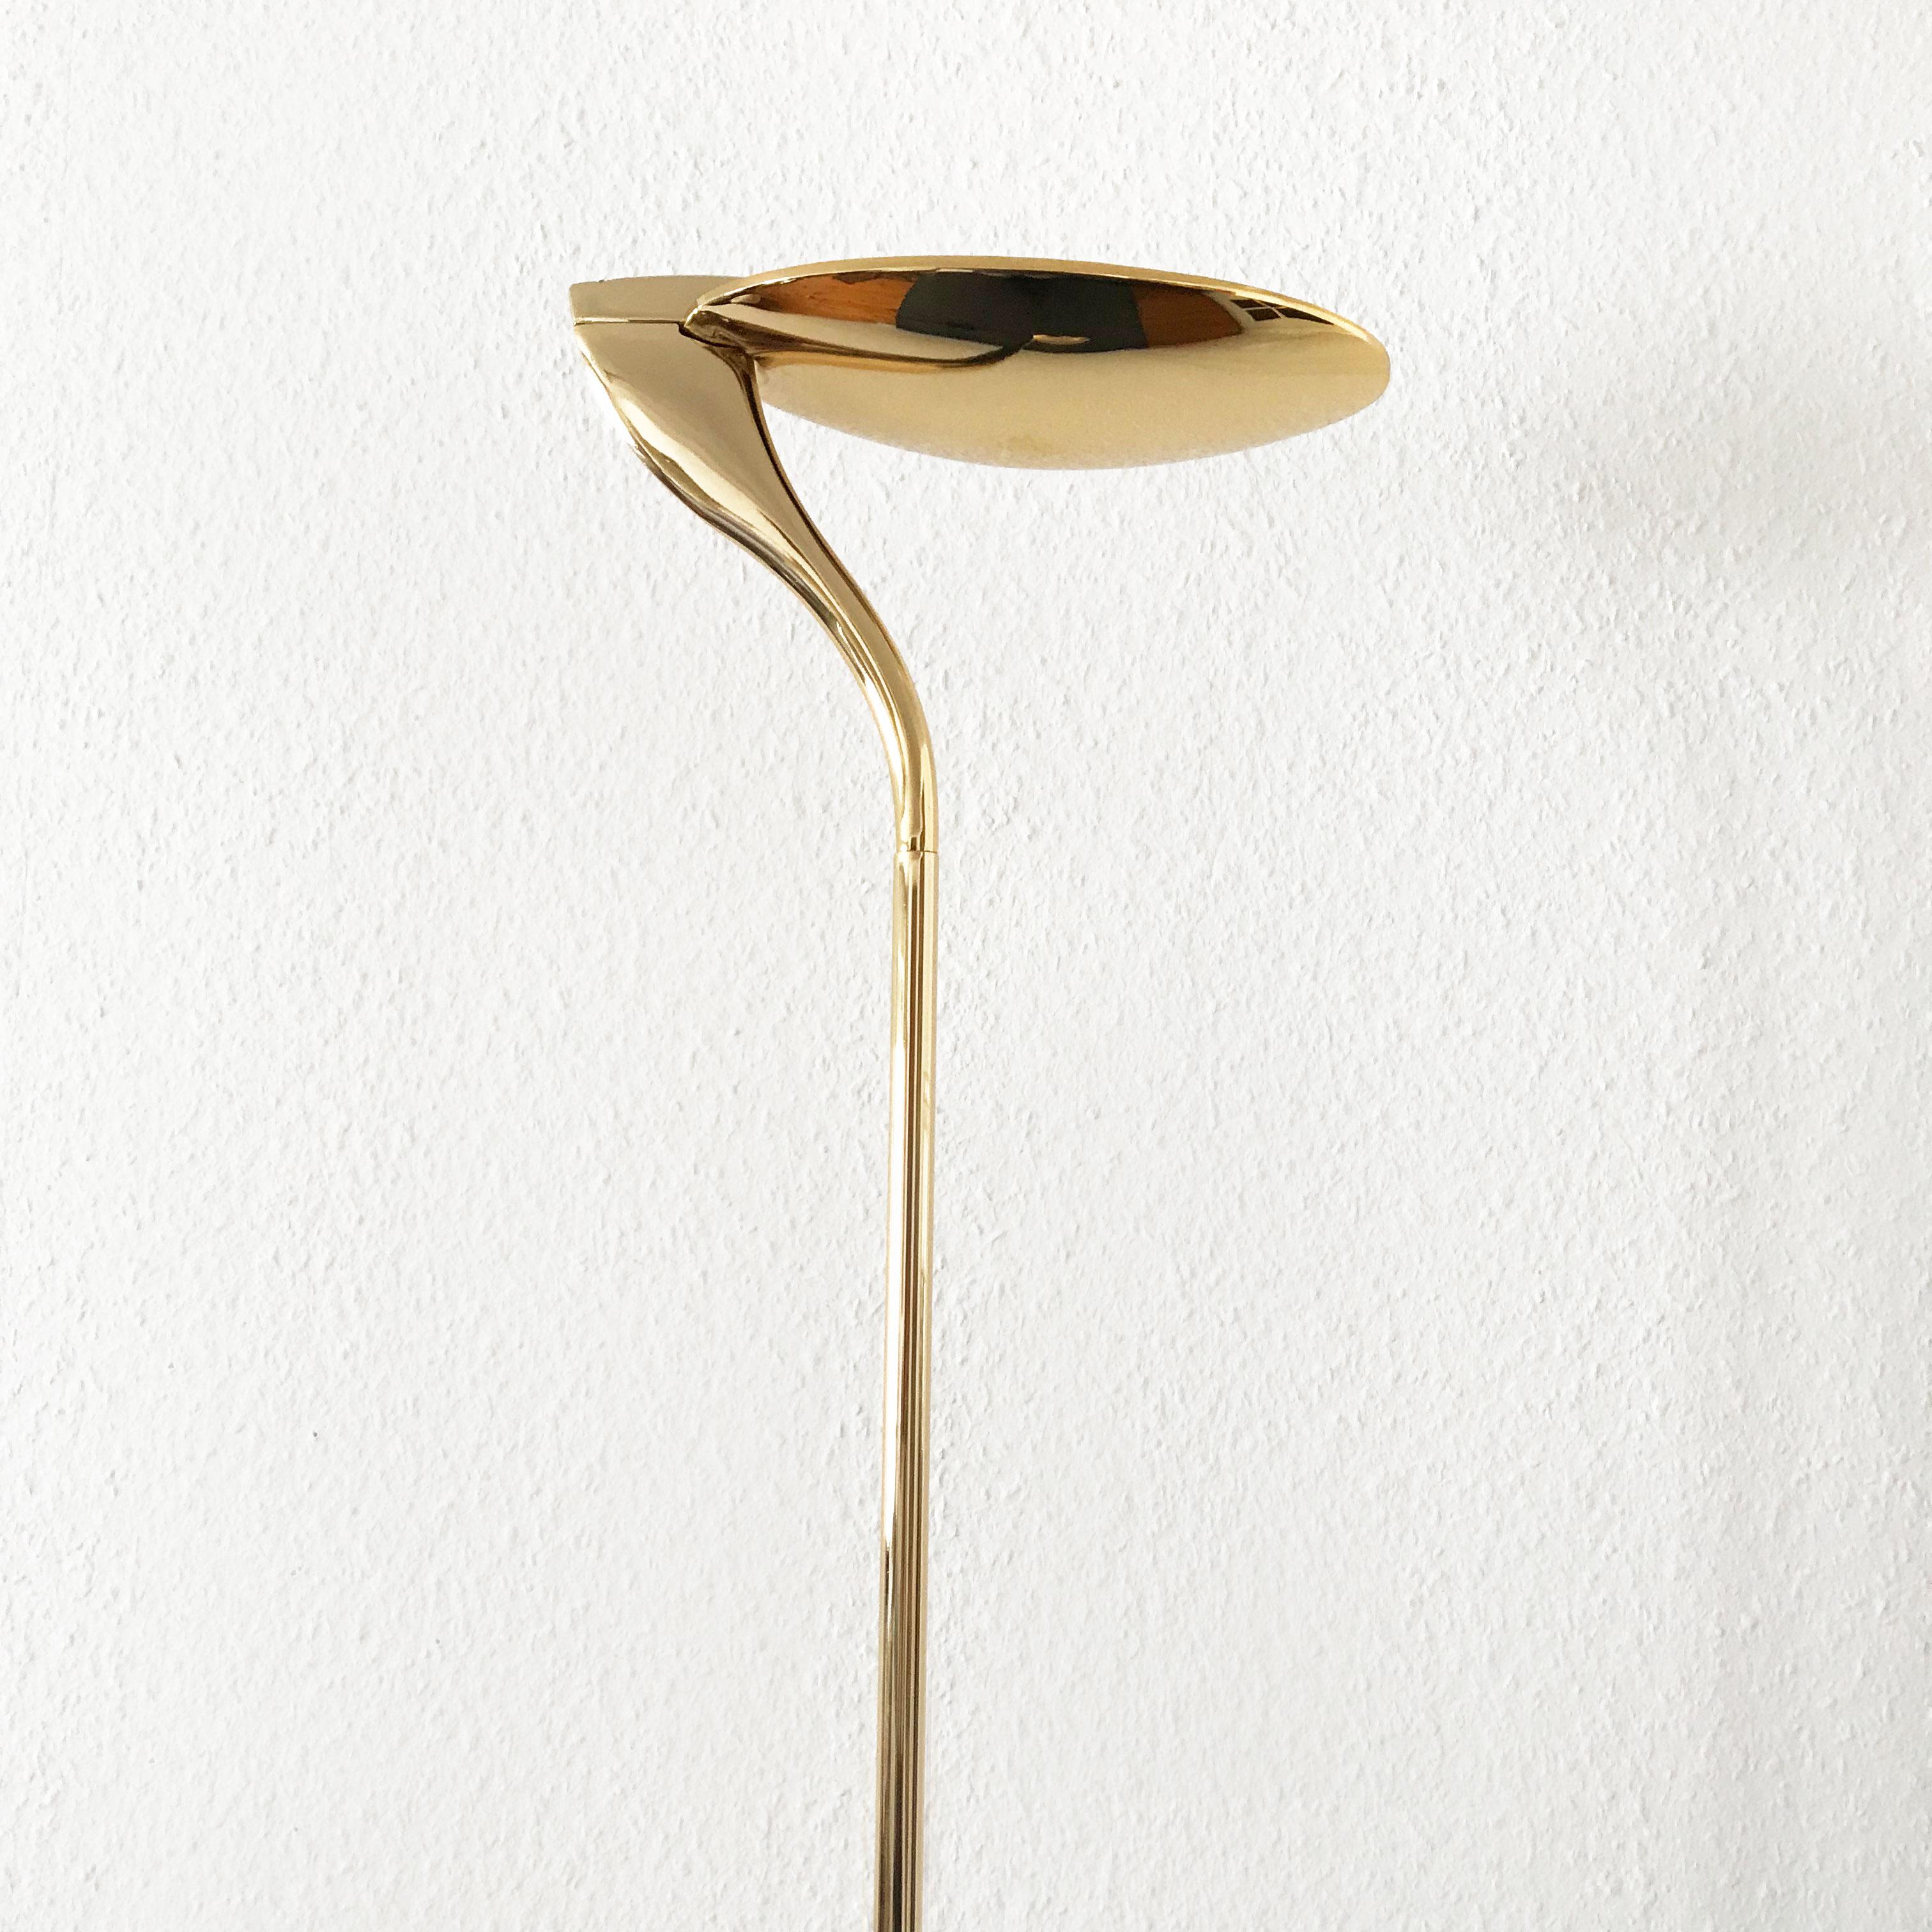 Exceptional Minimalist Brass Floor Lamp Uplighter by Florian Schulz, Germany For Sale 1